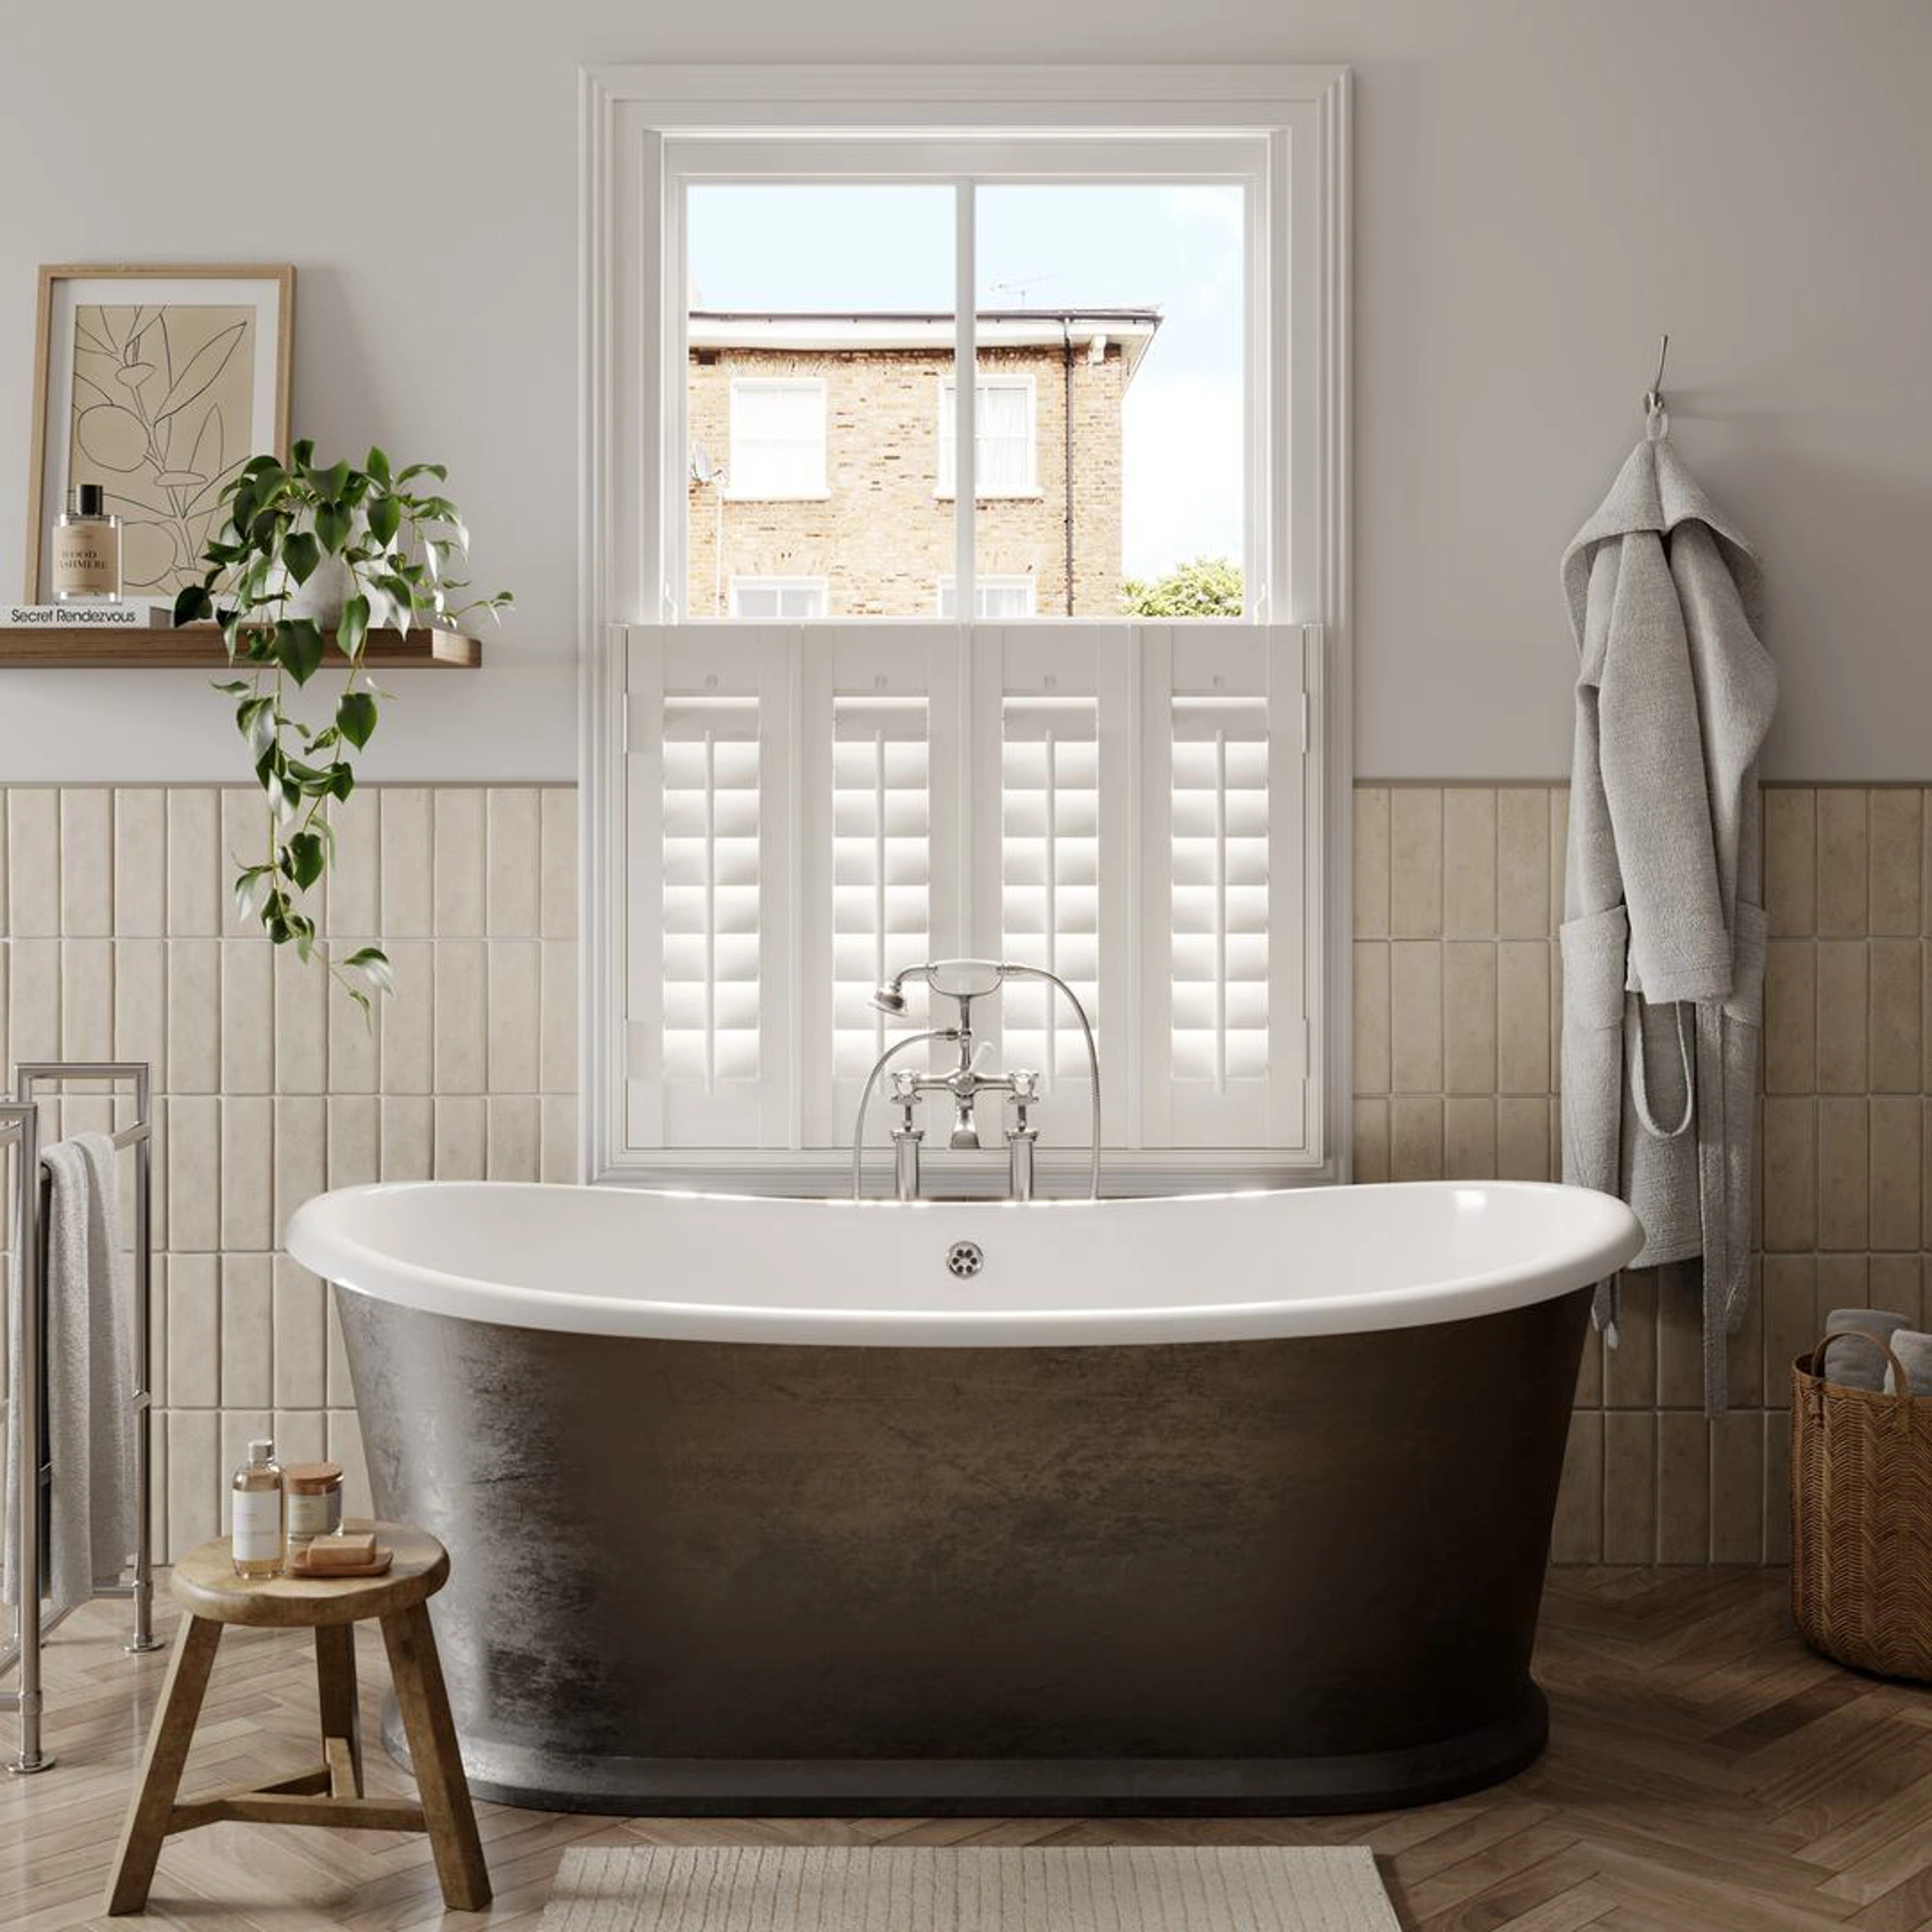 Silk White faux wood shutters in traditional bathroom